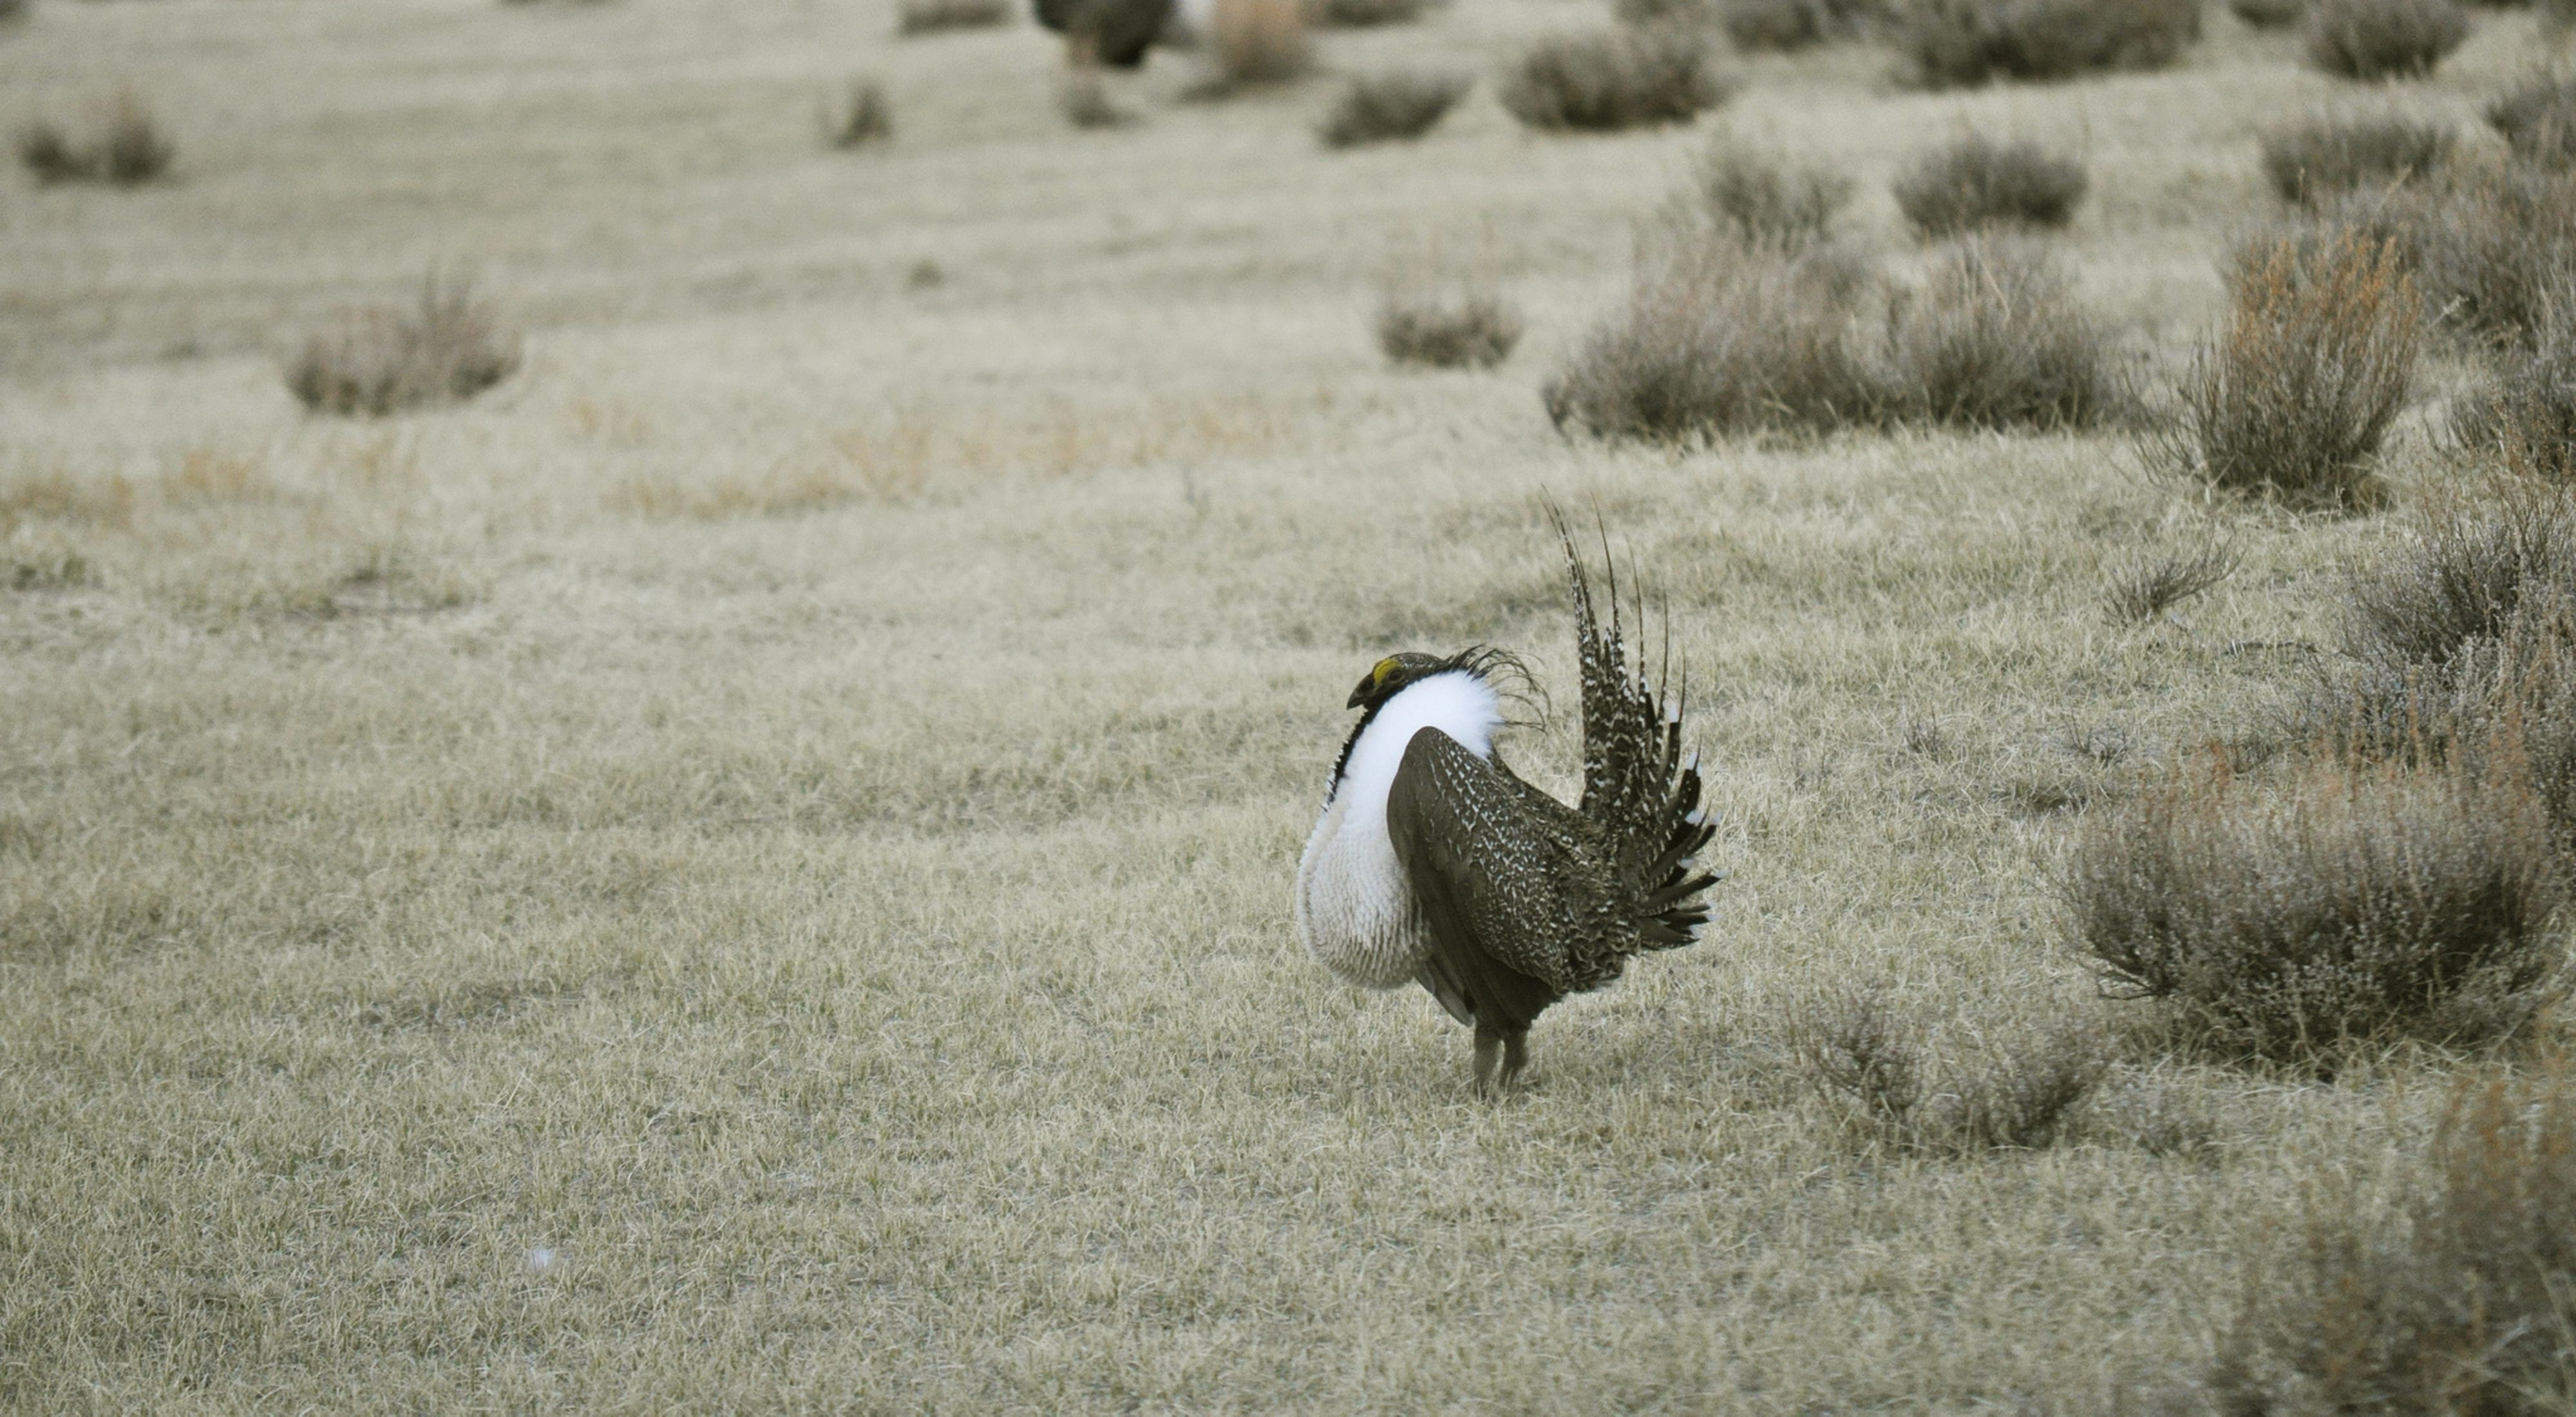 Male greater sage-grouse standing among the sagebrush